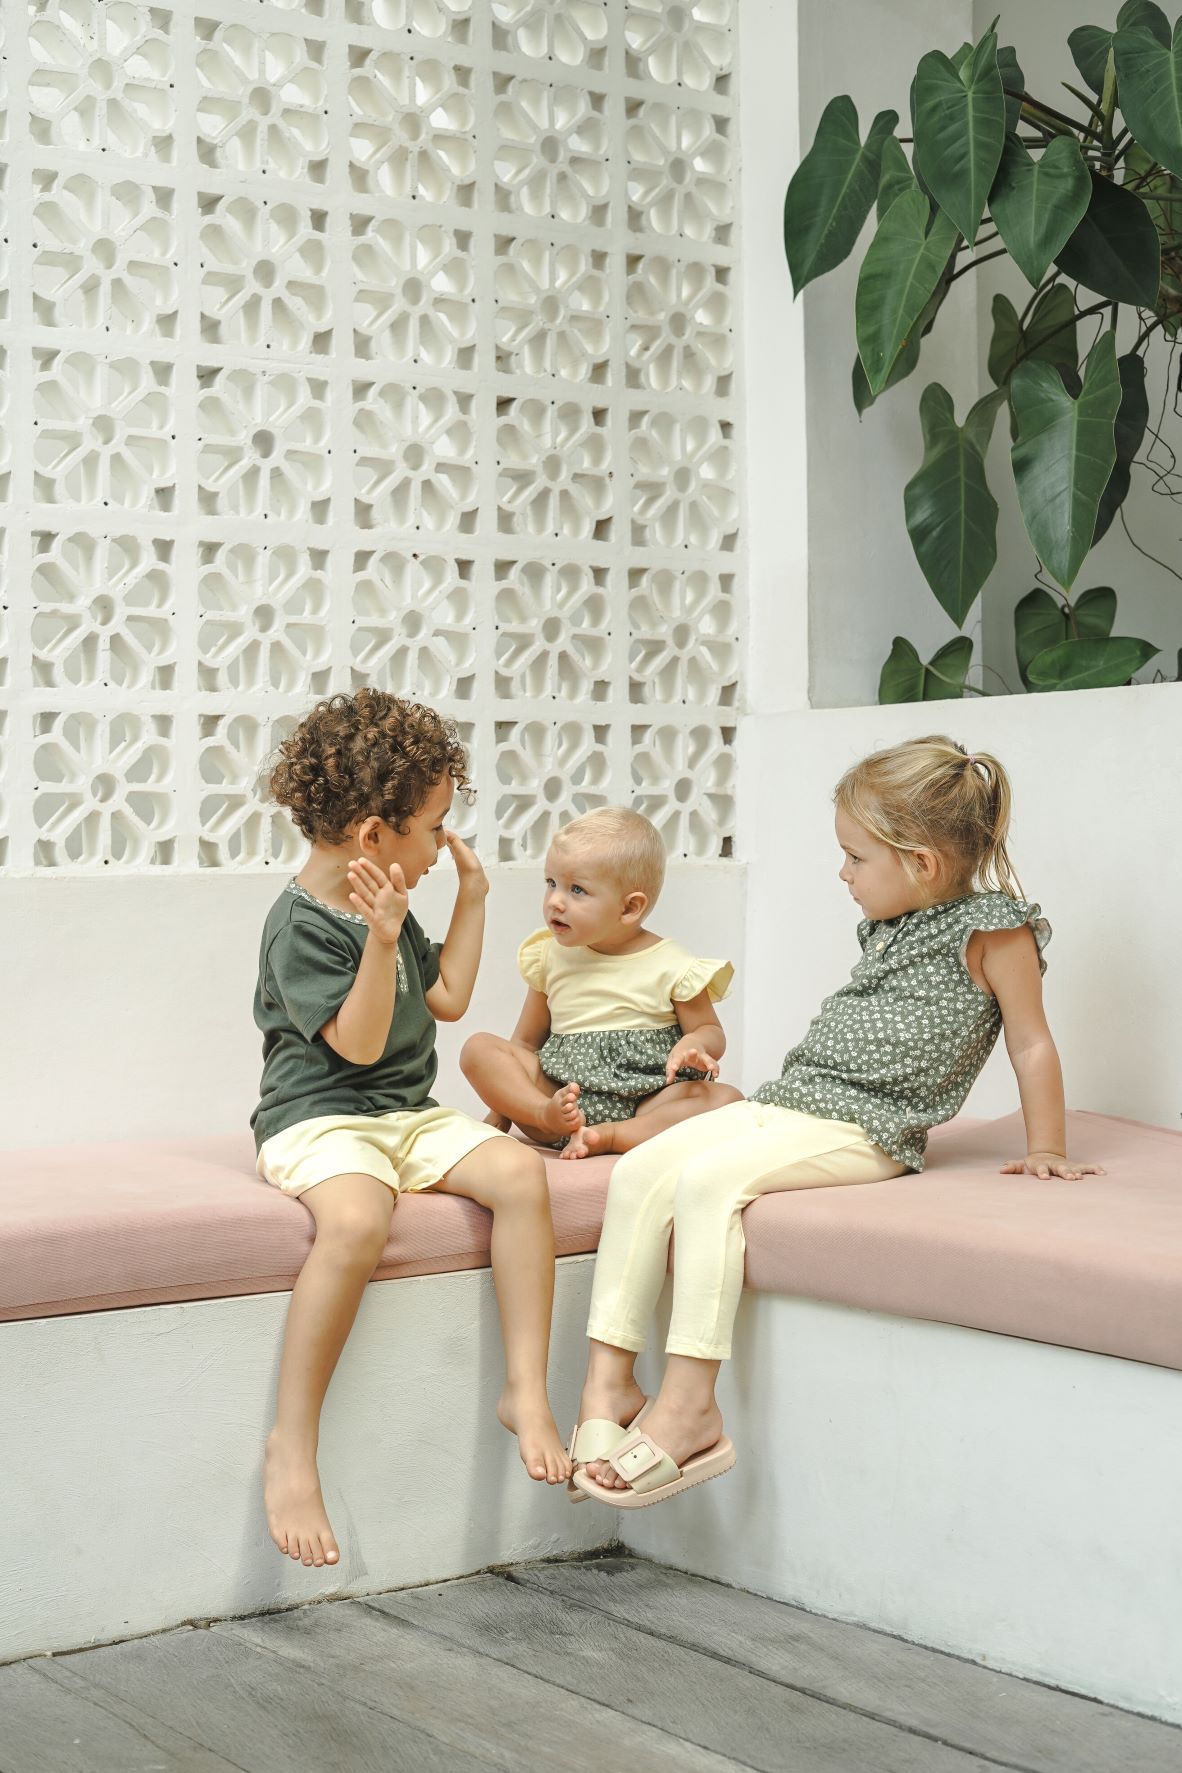 Beemores - Quality Kids Clothing Made For Daily Wear Malaysia | 